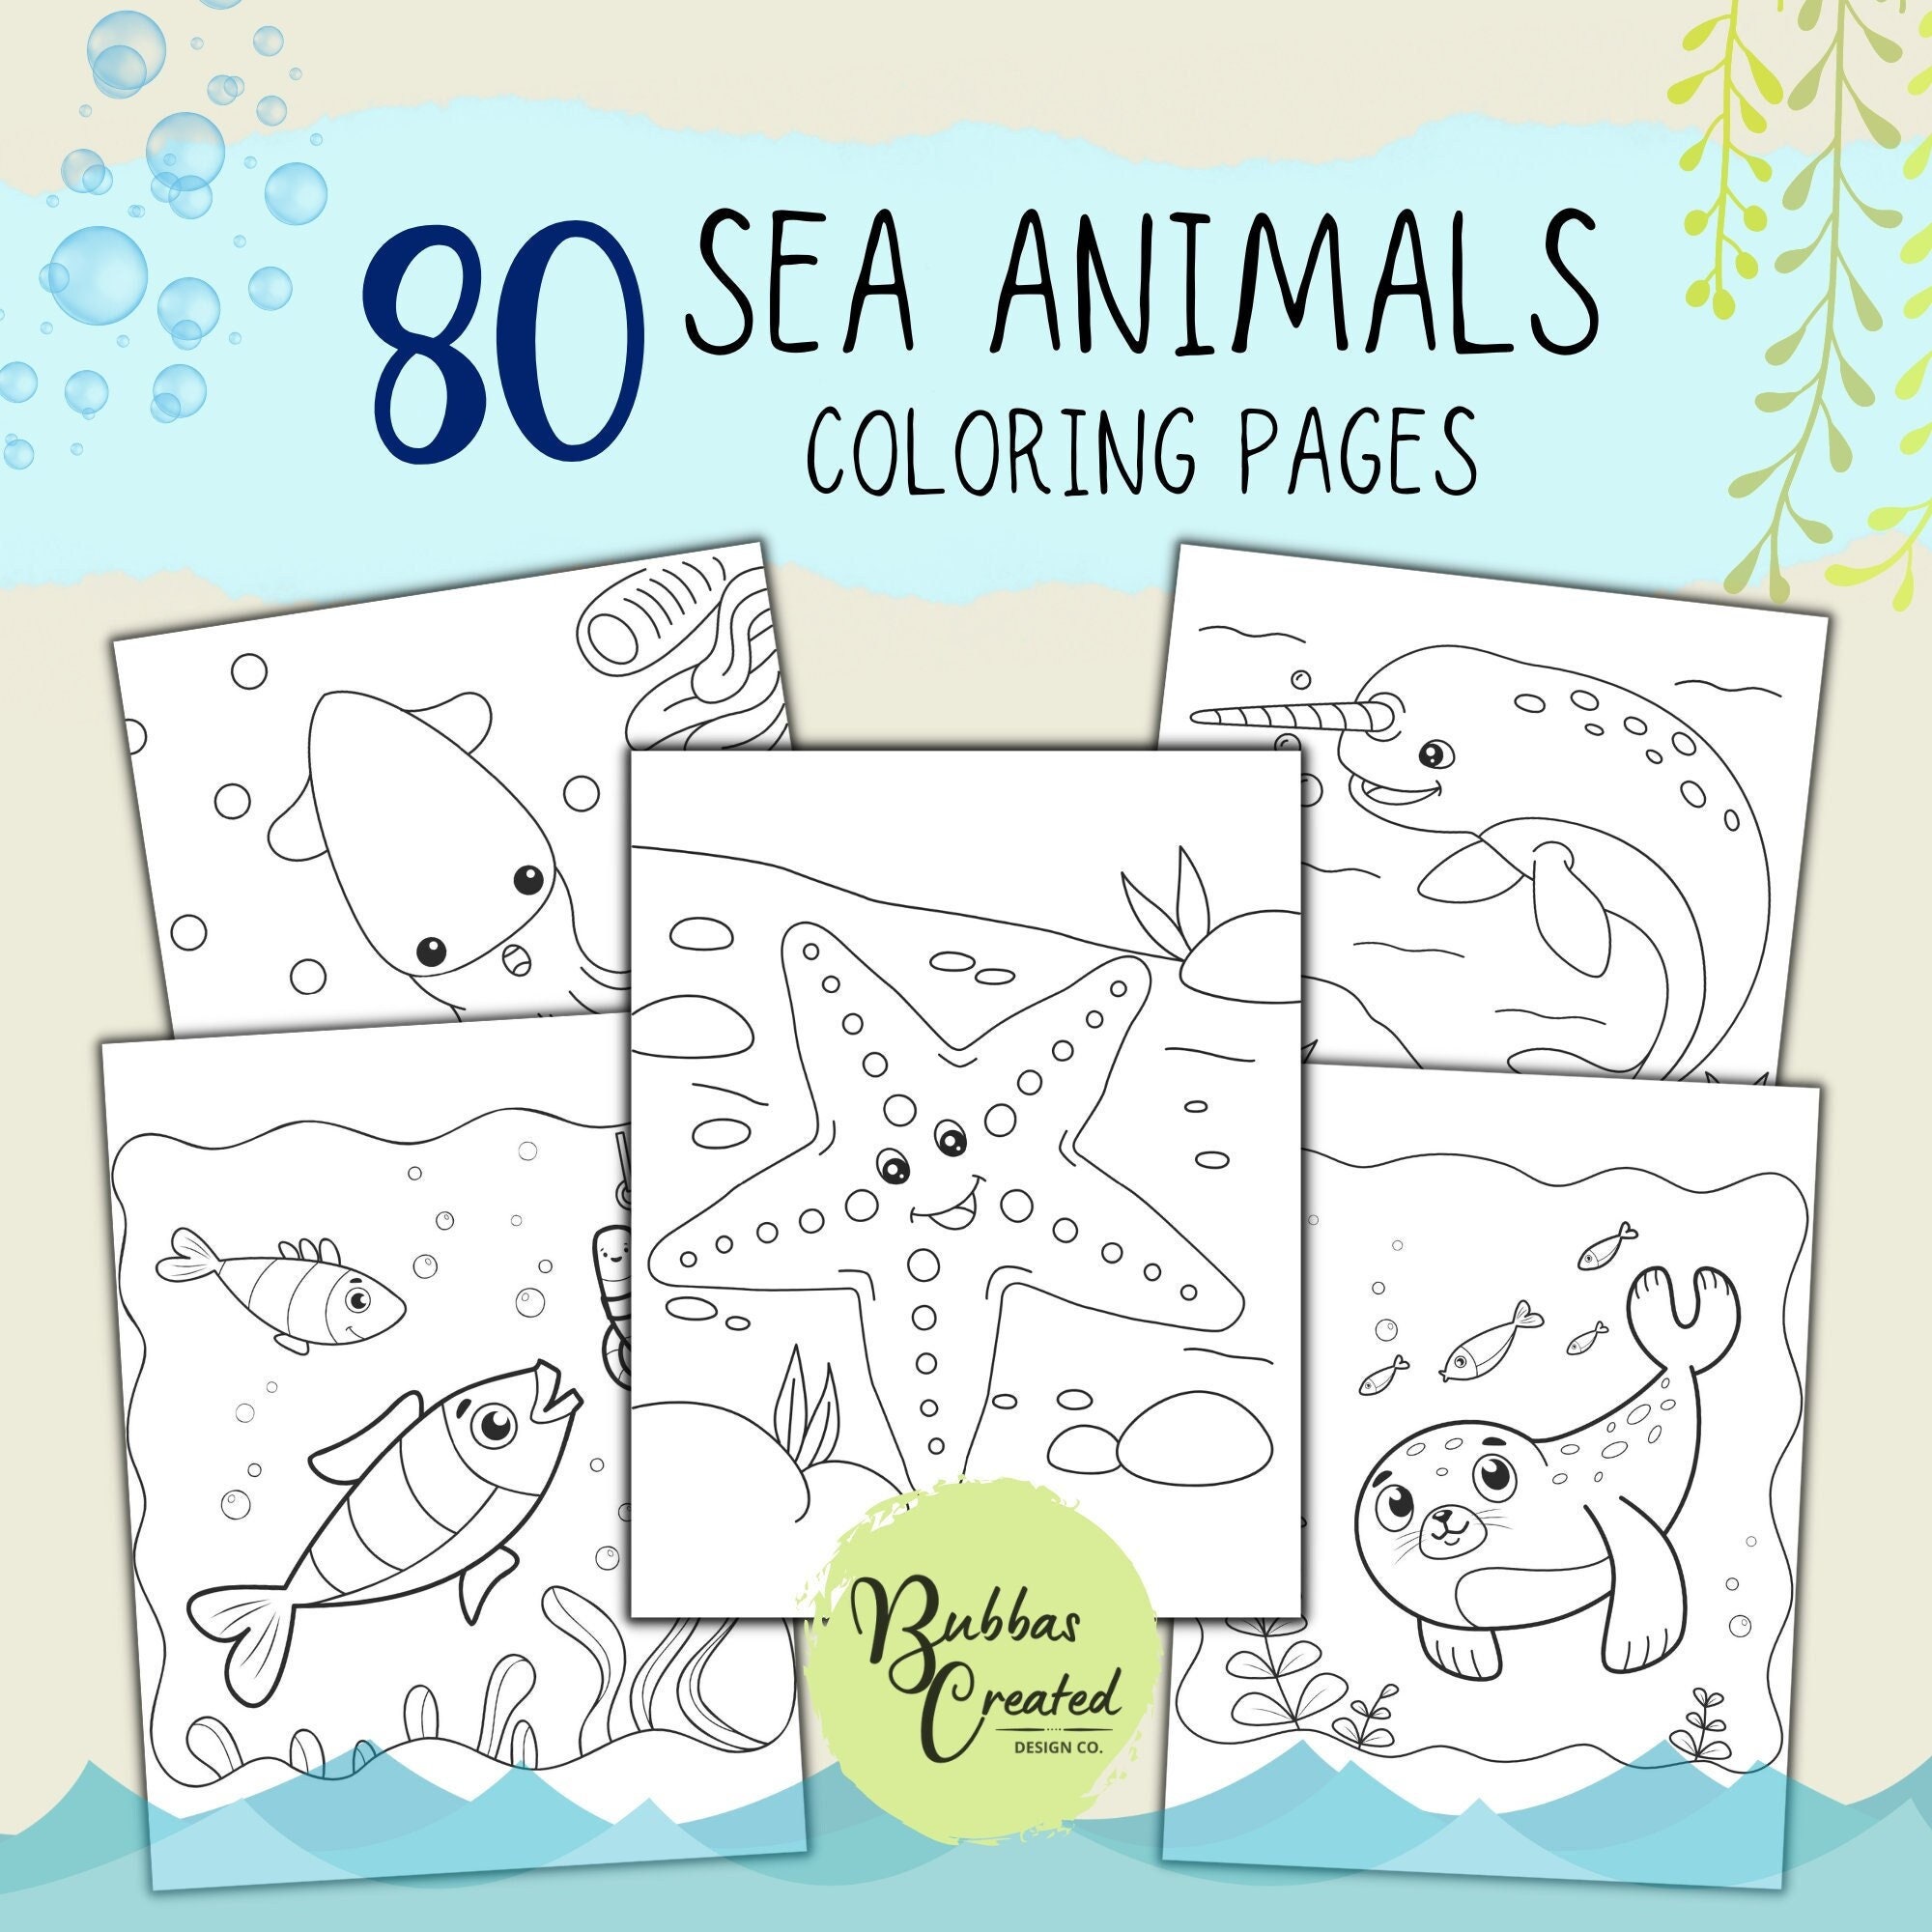 Free Printable Ocean and Sea Animal Coloring Pages 